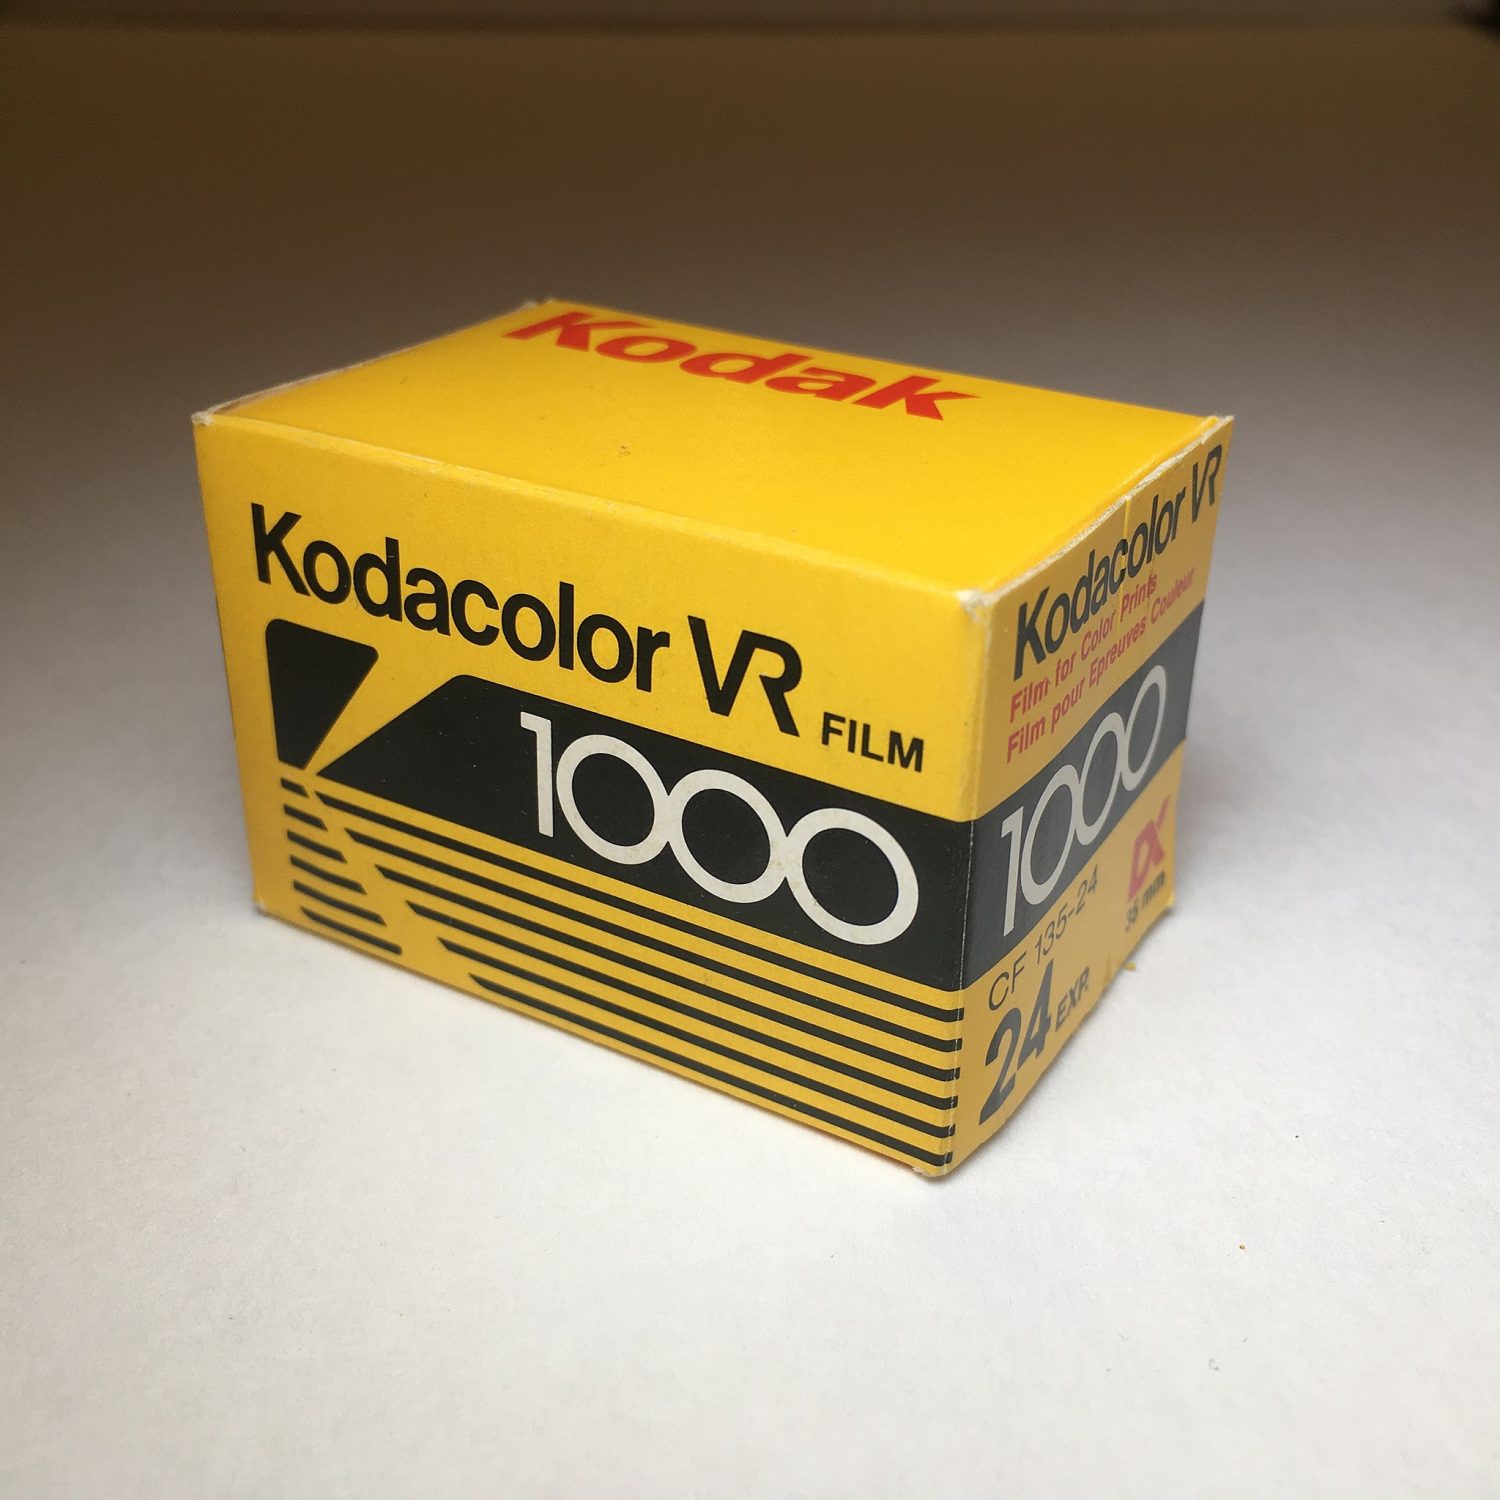 Kodacolor VR 1000 film box (Pic: Thistle33/Wikimedia Commons)